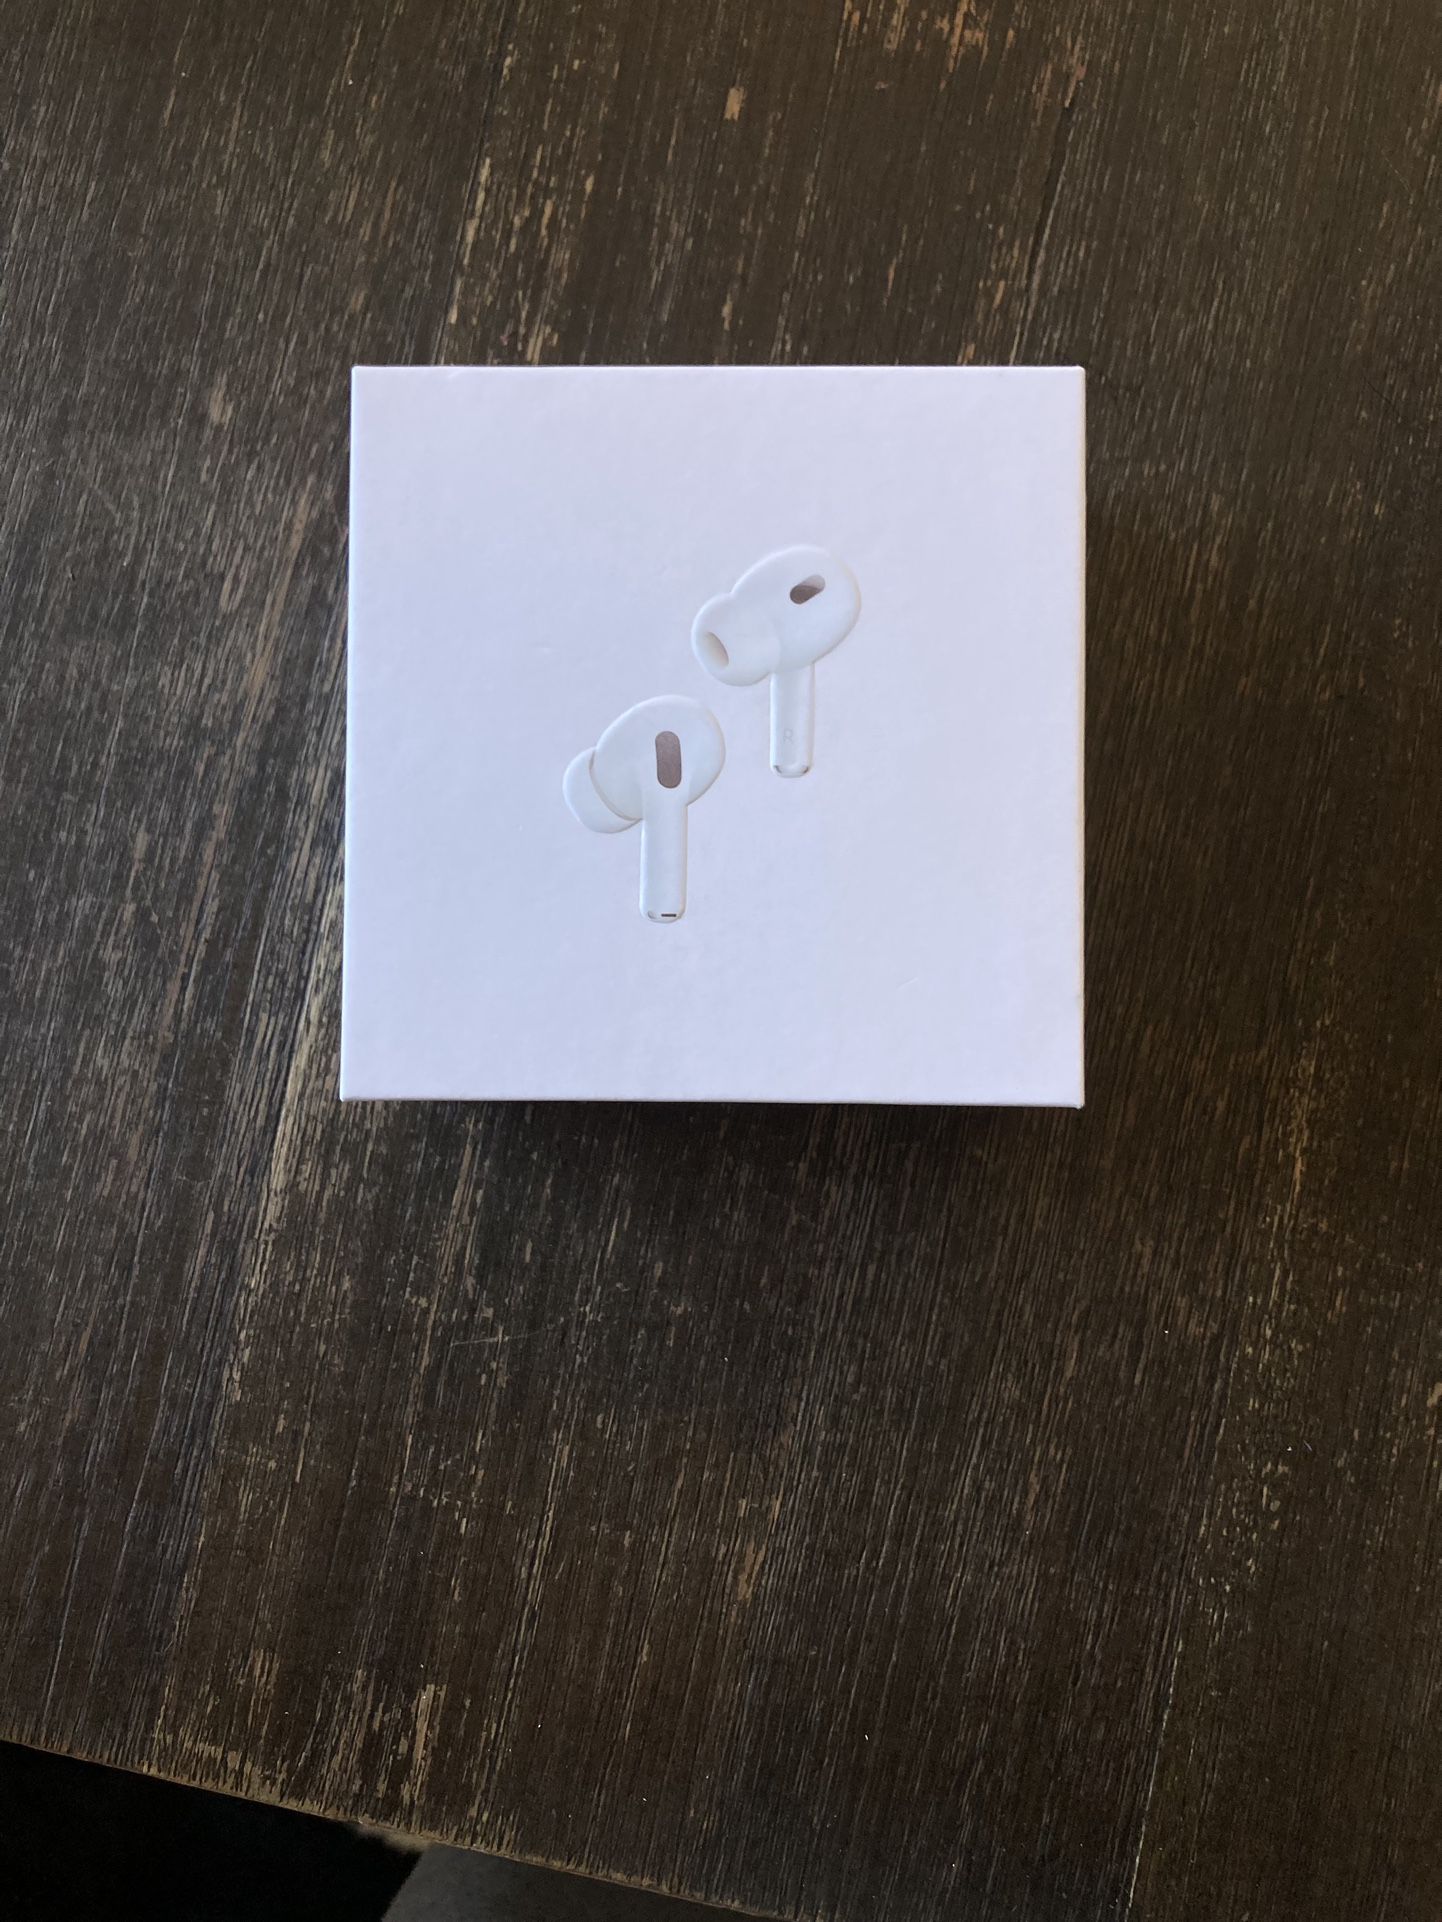 *BEST OFFERS* Airpod Pros